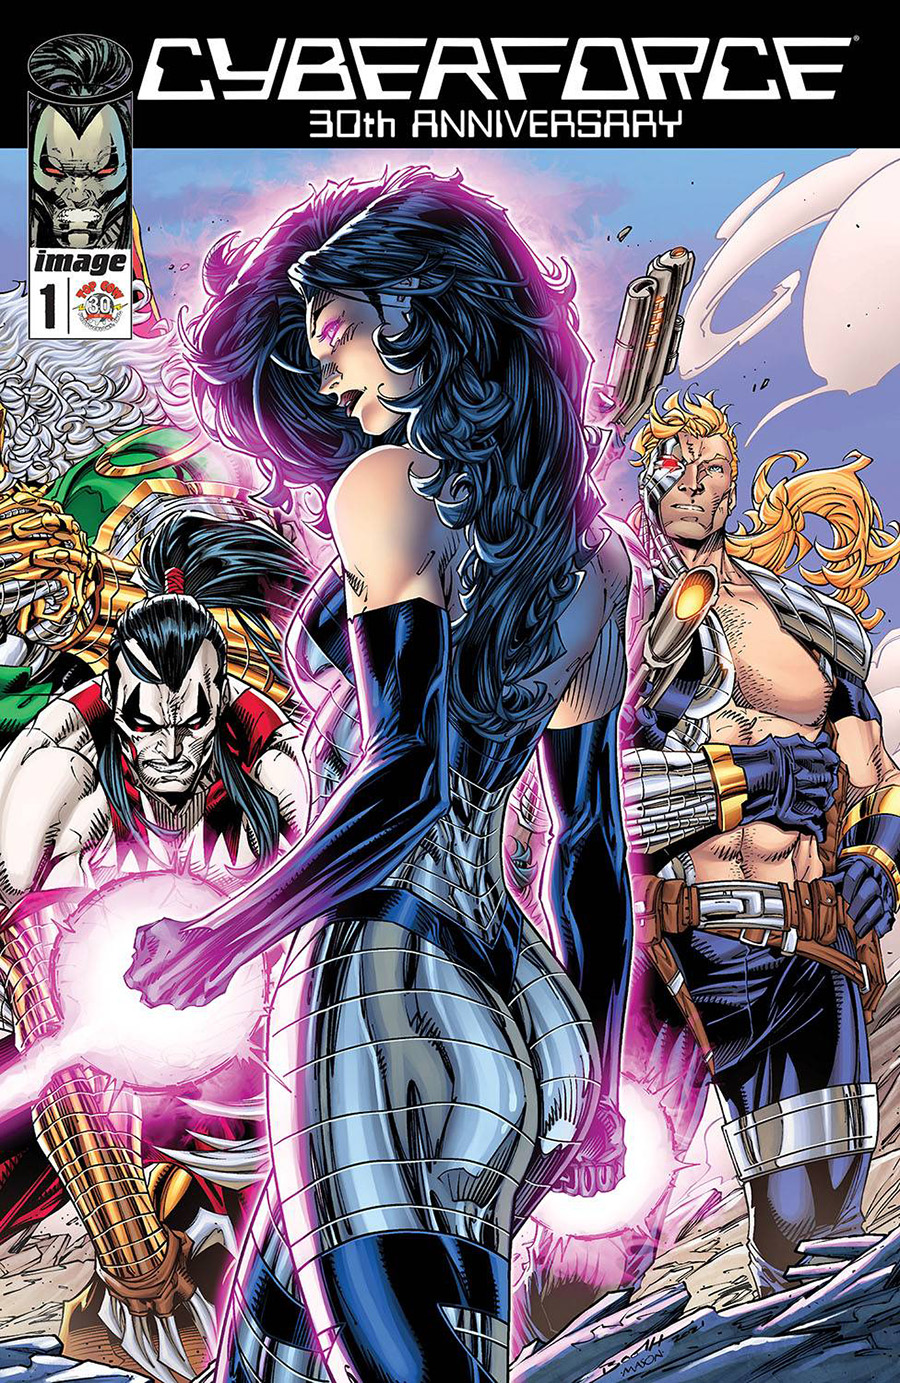 Cyberforce 30th Anniversary Commemorative Edition #1 Cover C Variant Brett Booth Cover